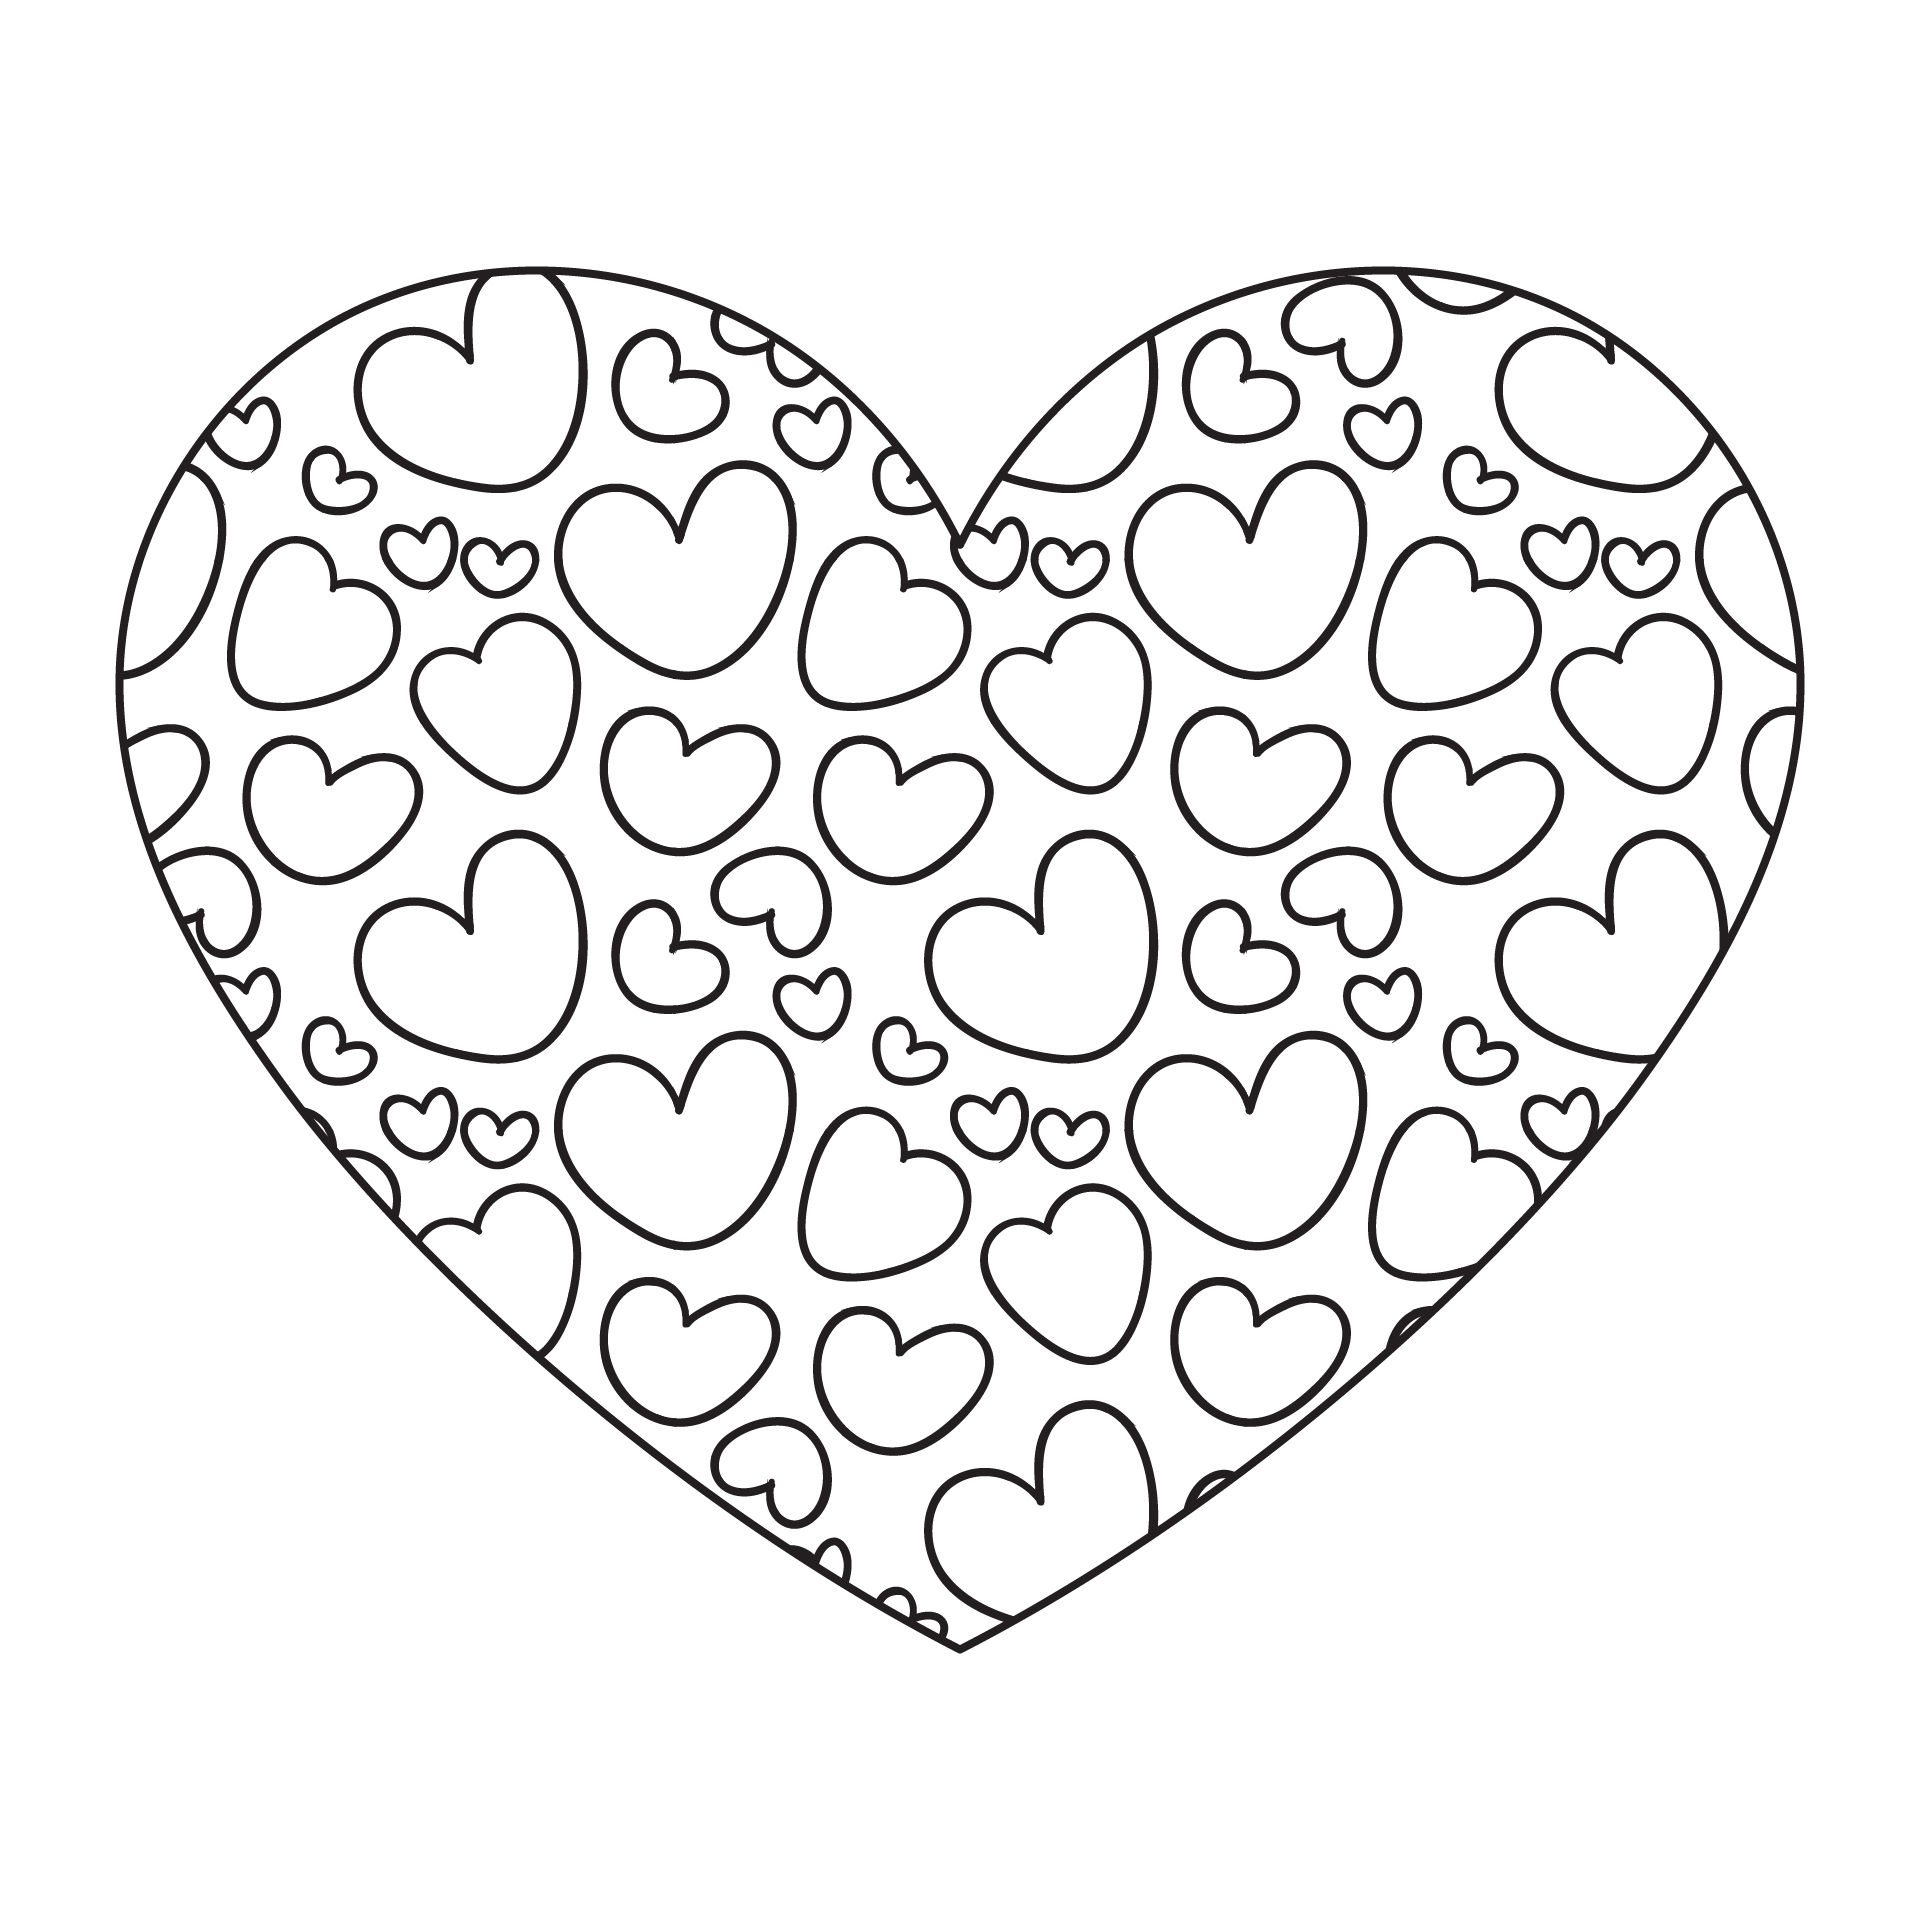 Blank Heart Shape Coloring Page